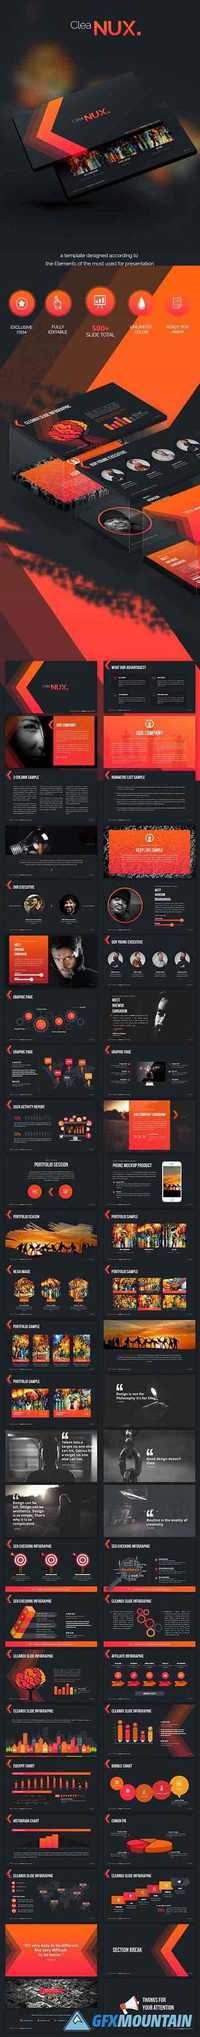 Cleanux - Powerpoint Presentation Template 20071999